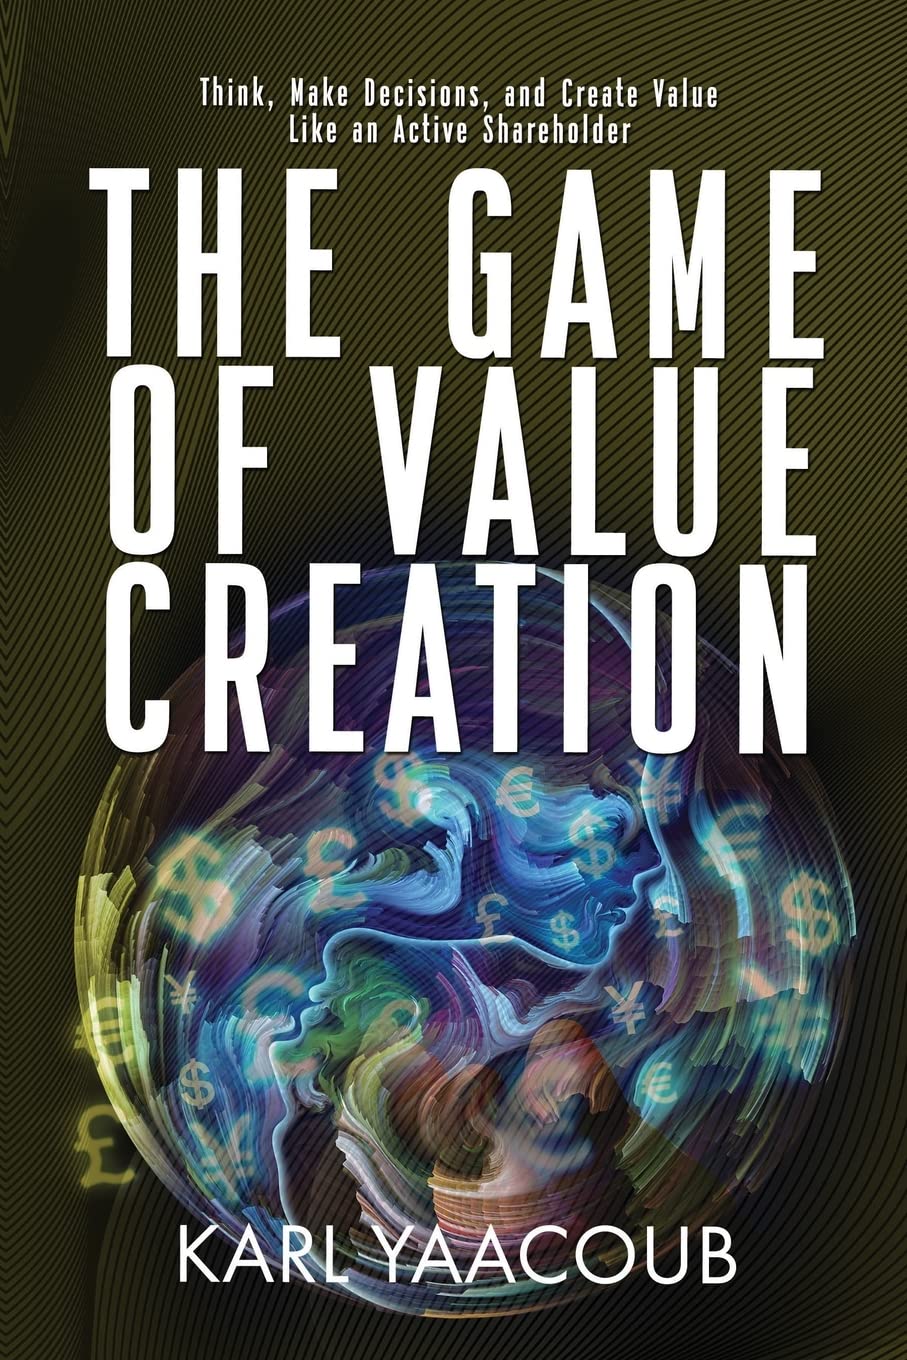 New business book "The Game of Value Creation" by Karl Yaacoub is released, an insightful guide to applying corporate value creation strategies to private businesses 